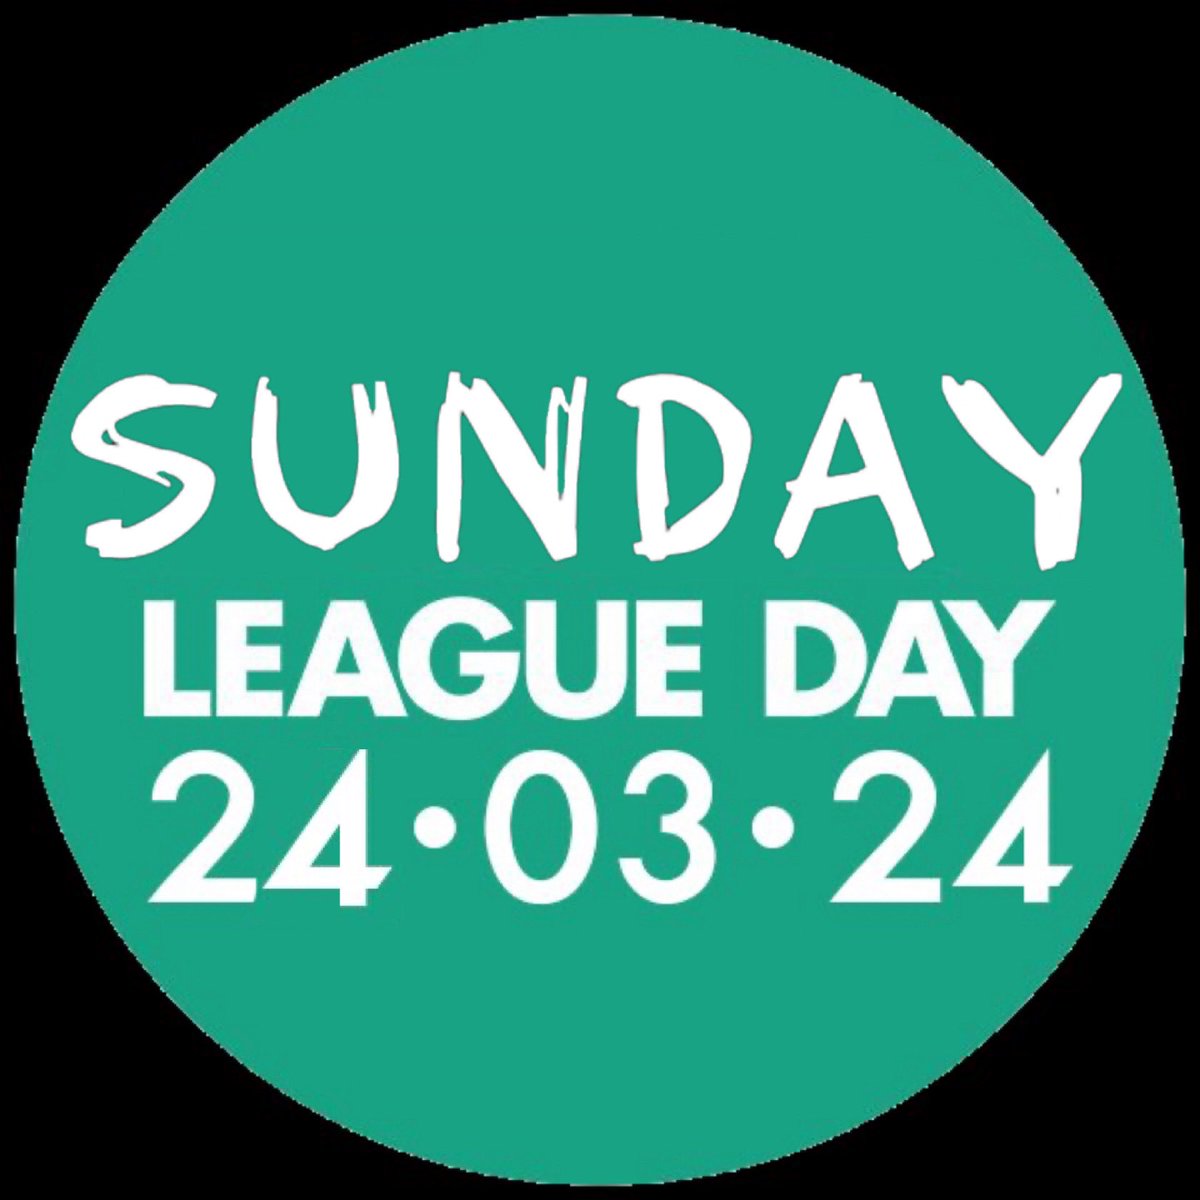 Let’s get this account to 250 followers for #SundayLeagueDay by the end of today! 🙏 Who’s helping us reach the target, and spreading word about the very first Sunday League Day in March 2024!?